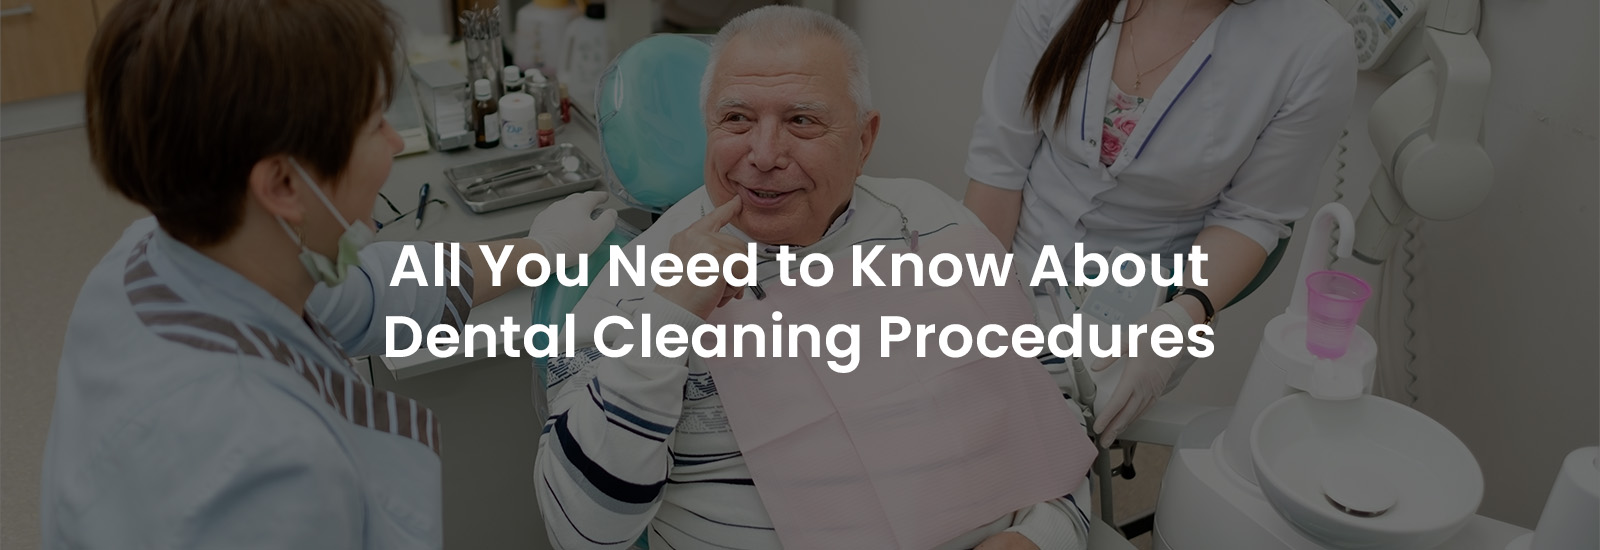 All You Need About Dental Cleaning Procedures | Banner Image